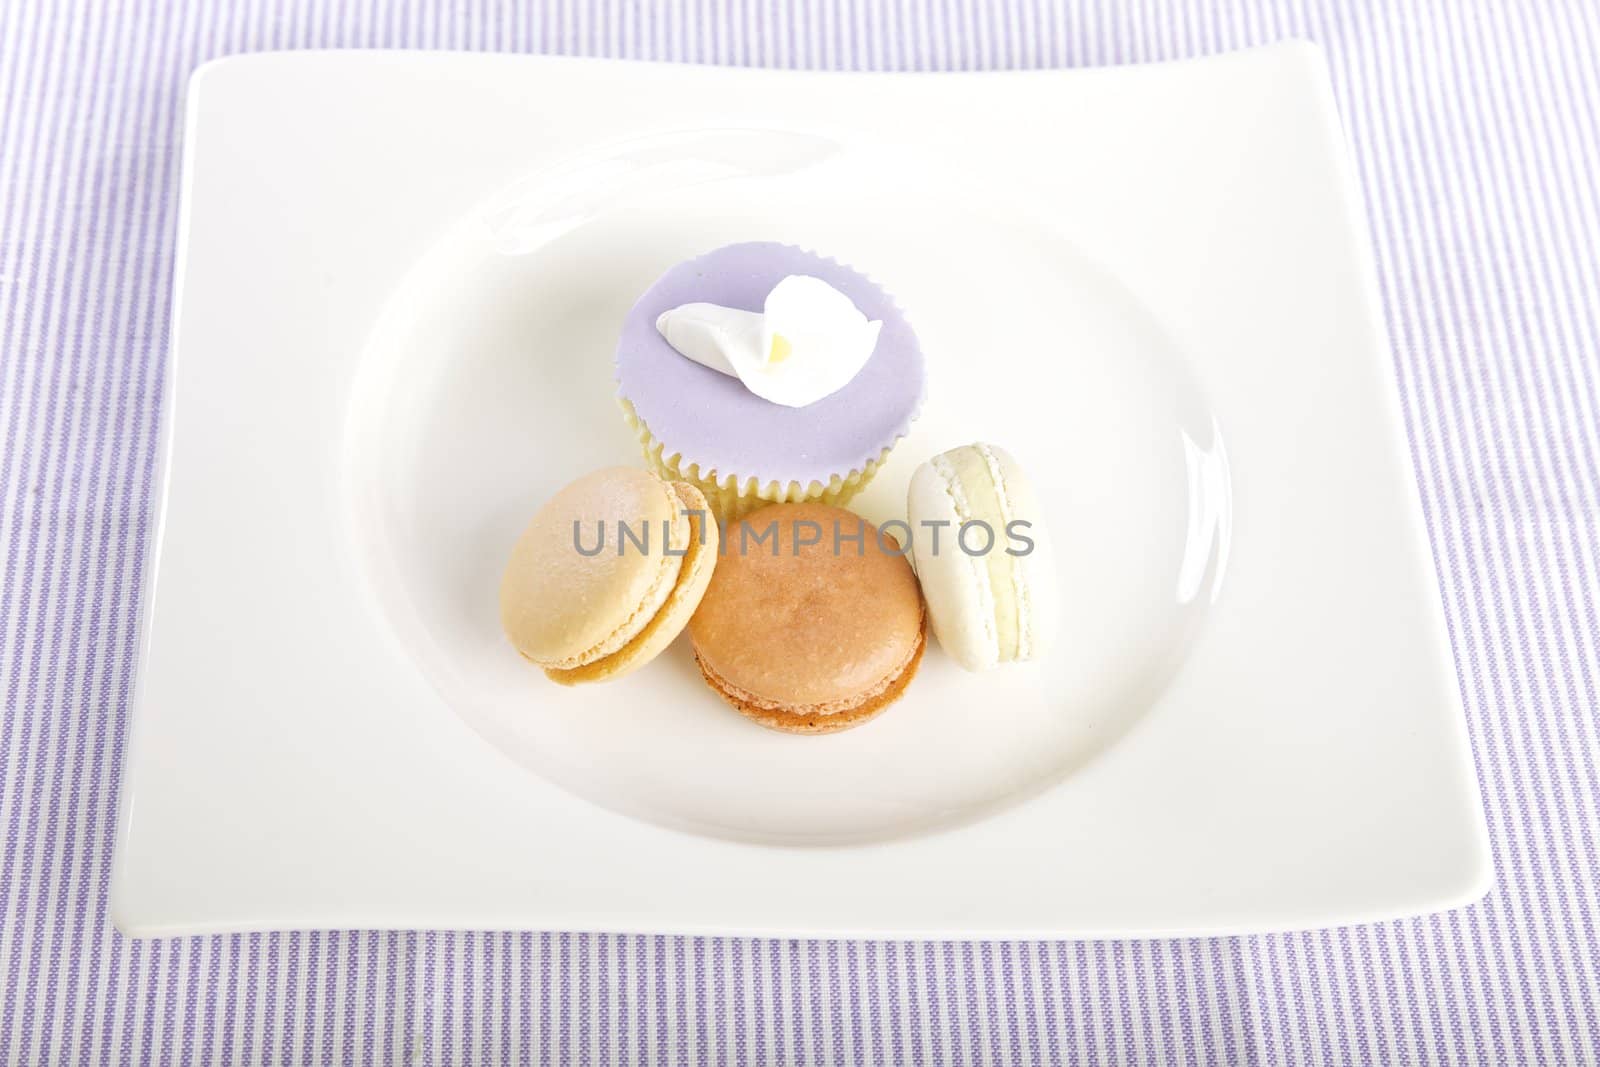 Cupcake and macaroons displayed on a plate